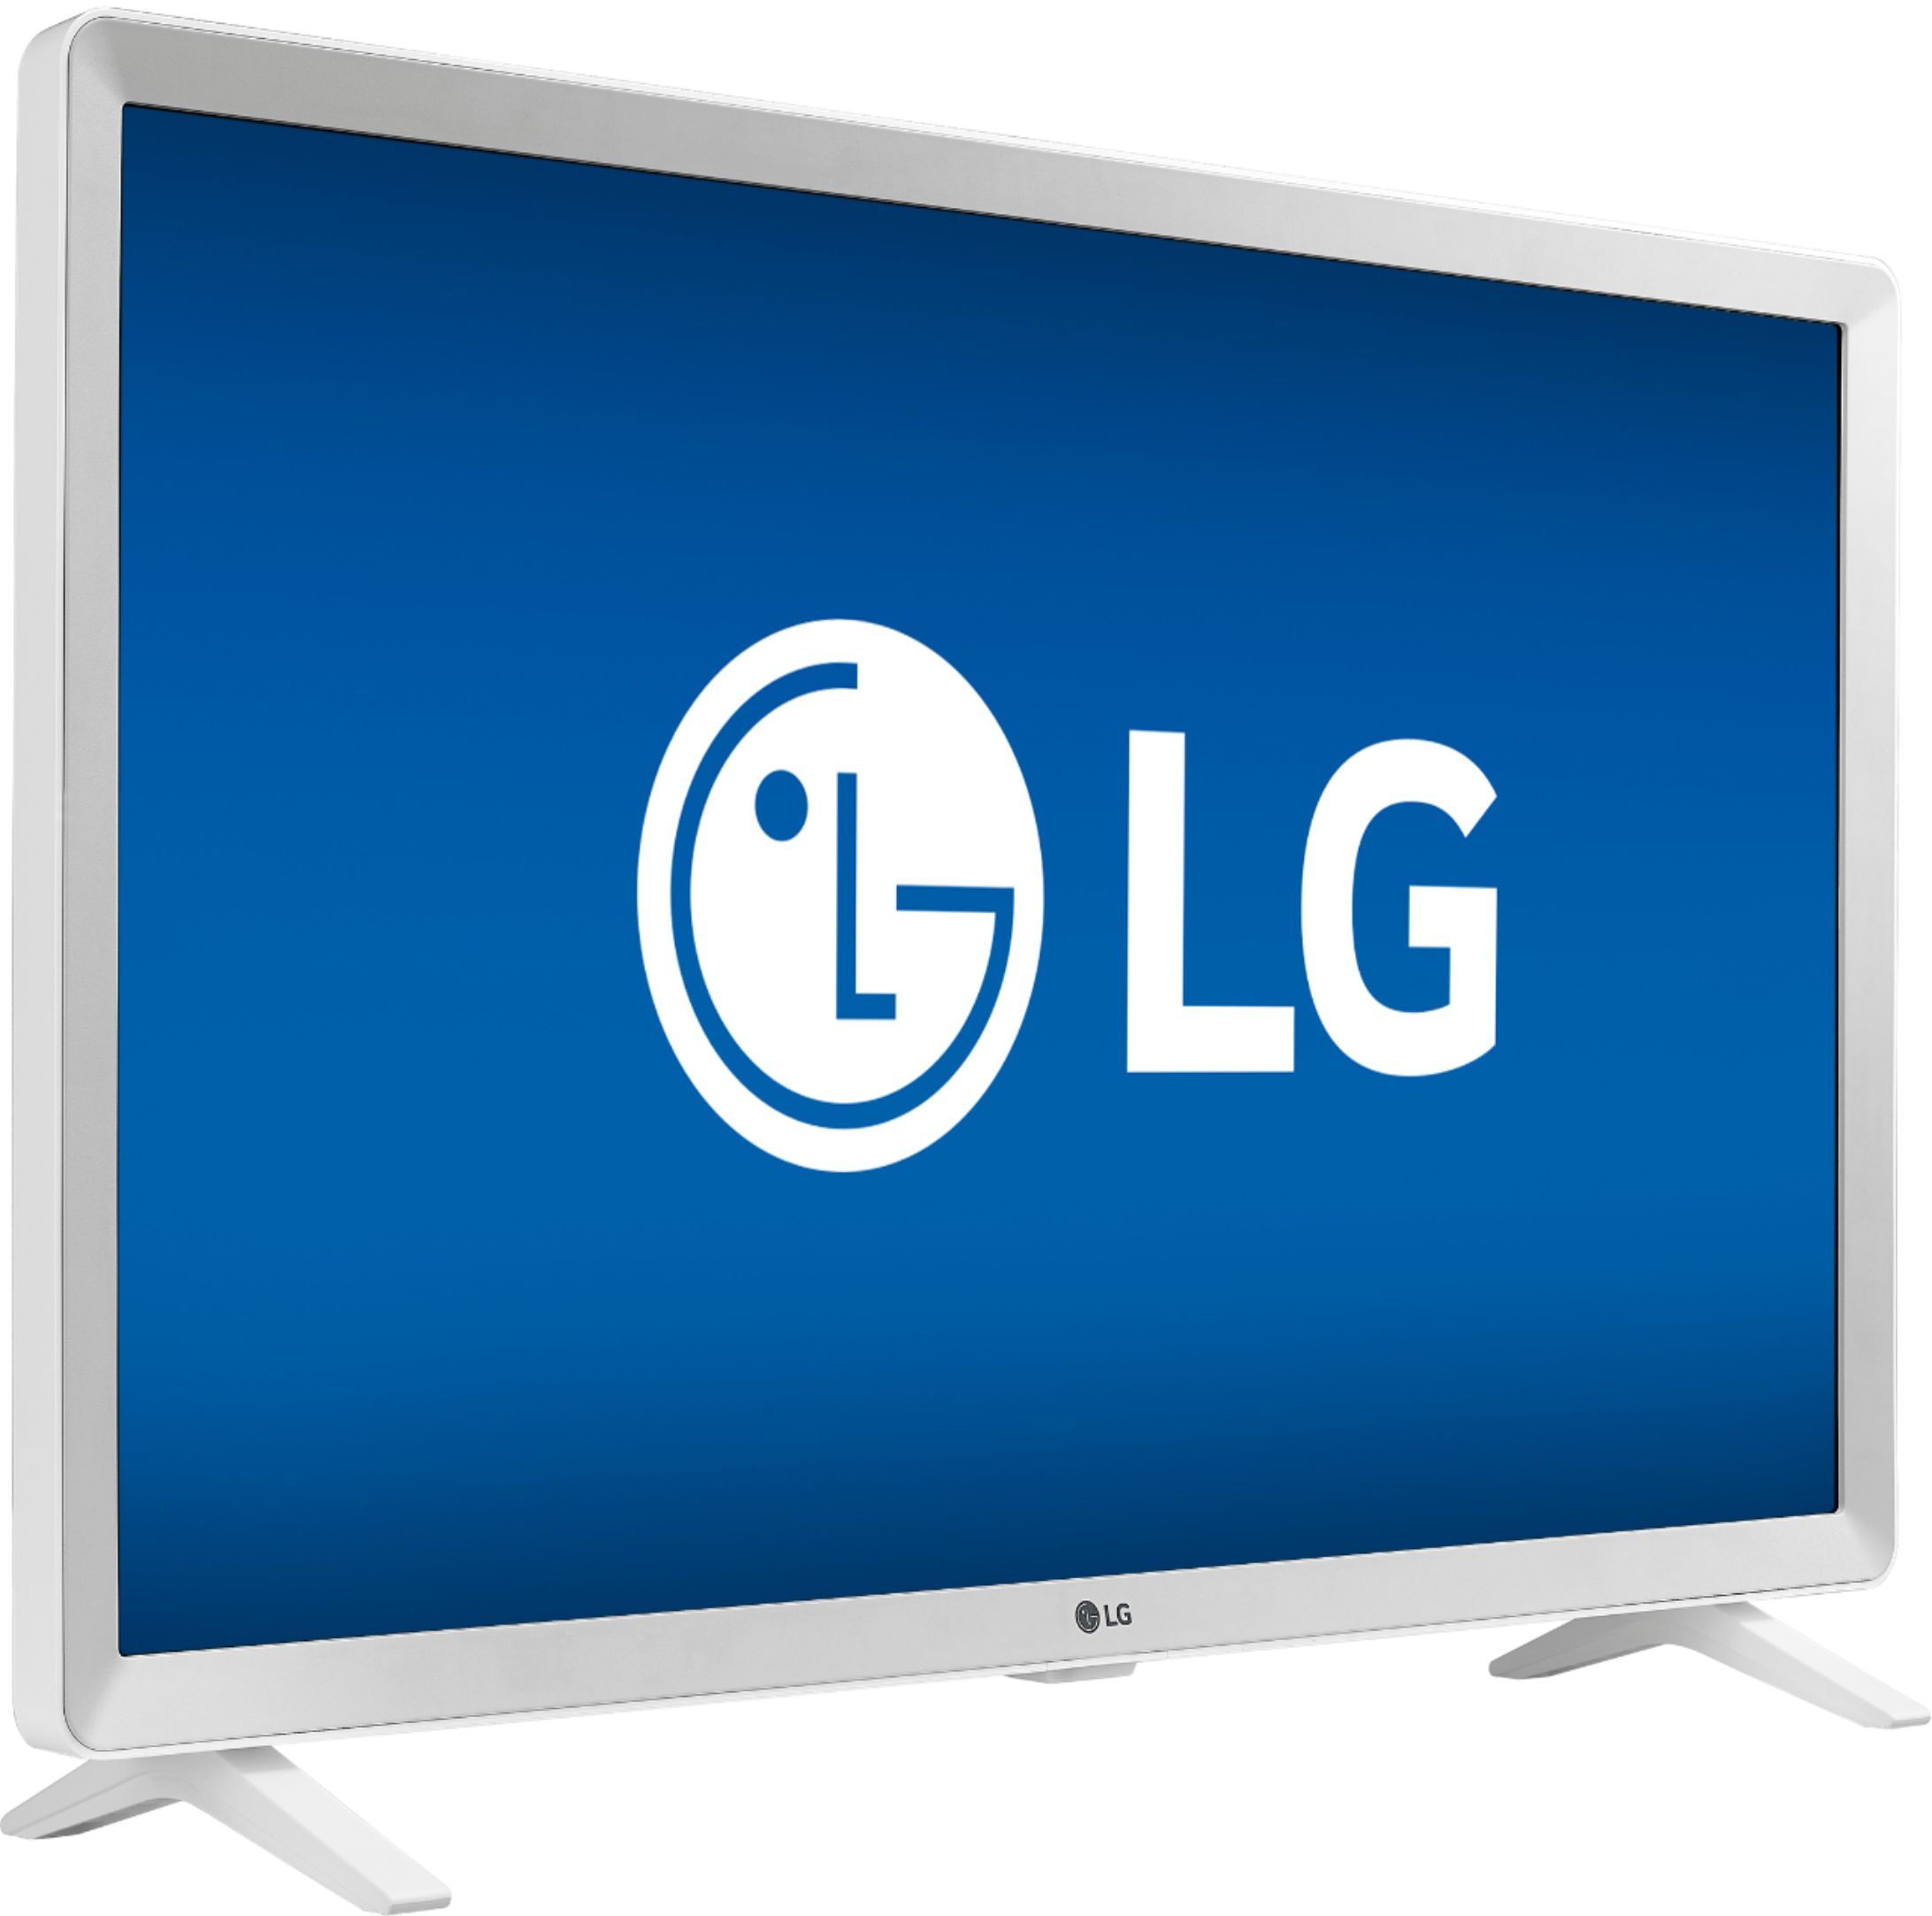 LG 24 HD Smart TV: Enhanced Viewing with webOS 3.5 - 24LM530S-PU 